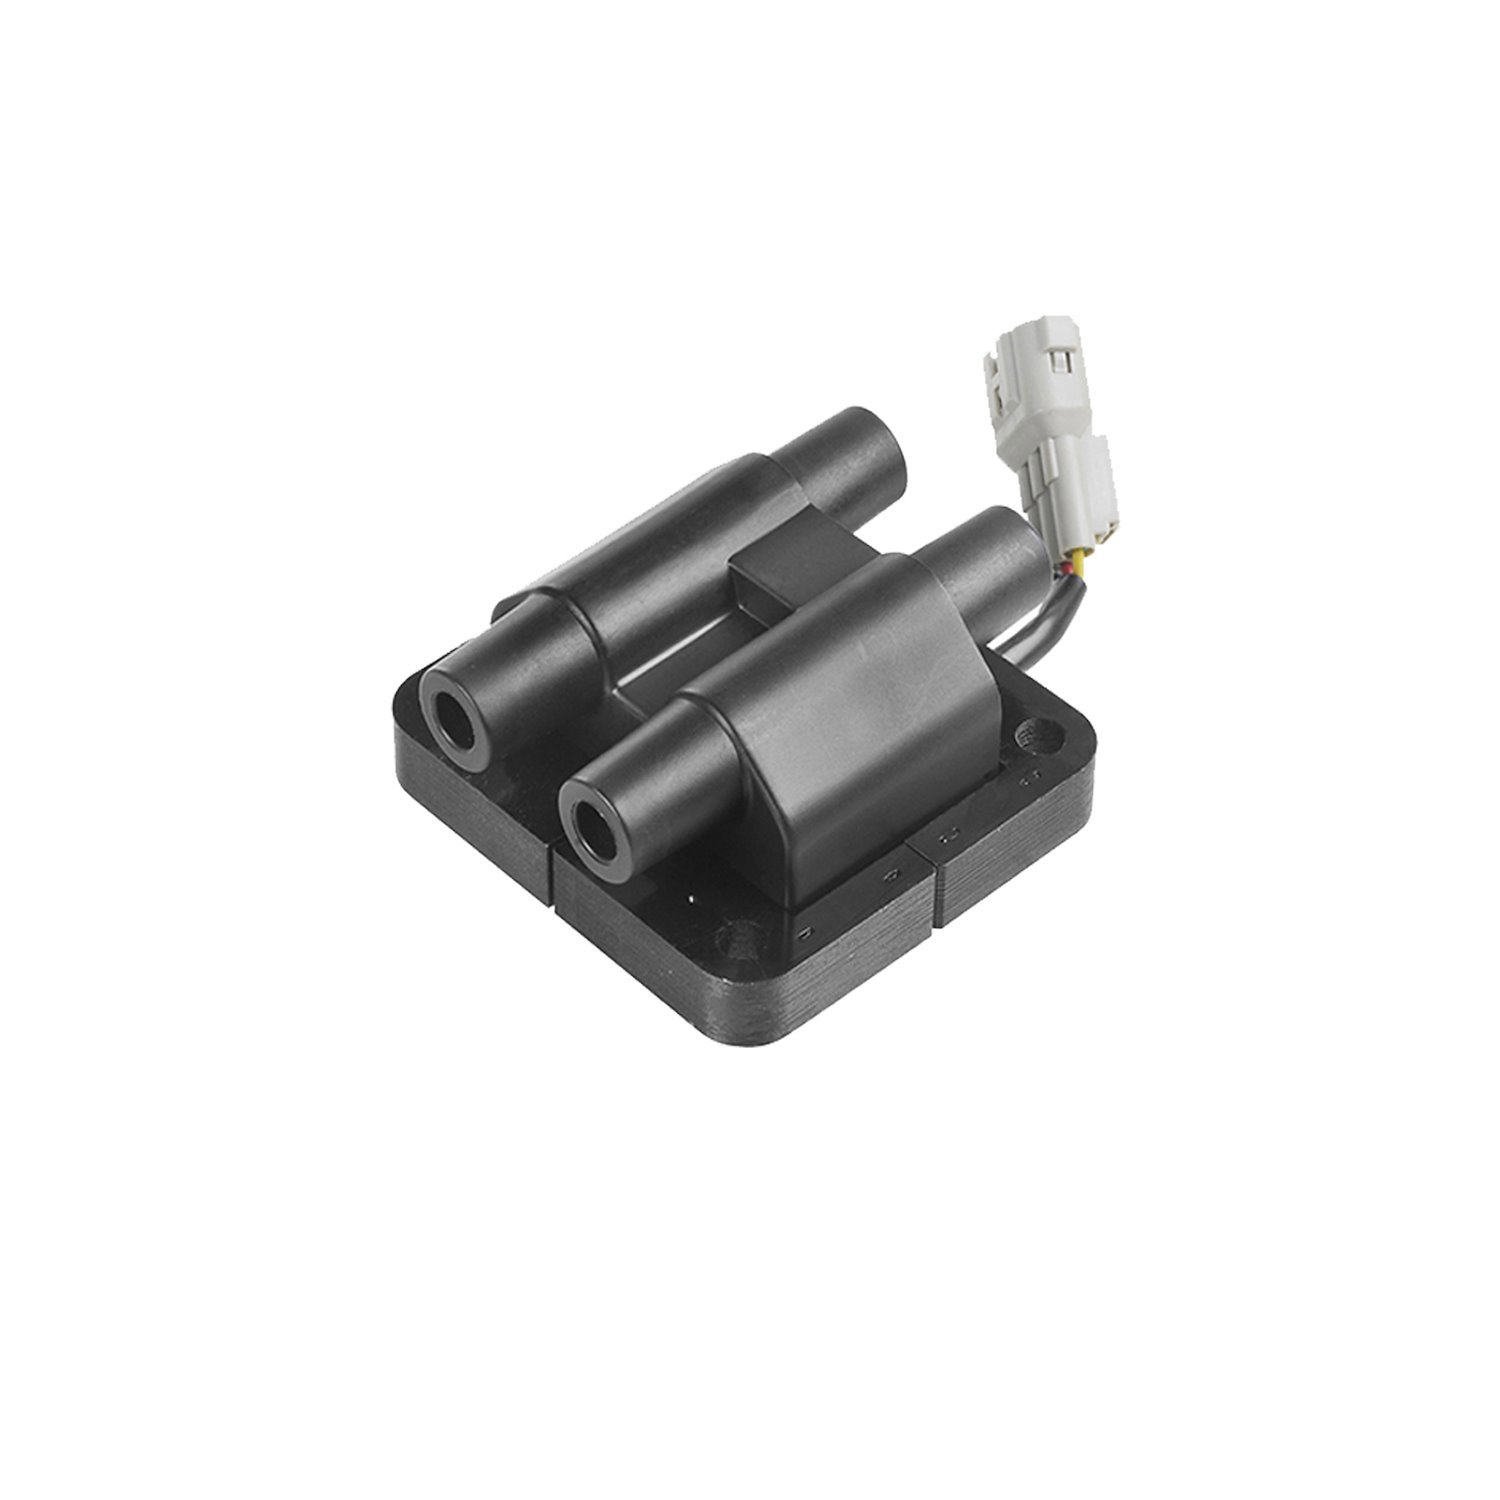 OE Replacement Ignition Coil for Subaru Forester Impreza